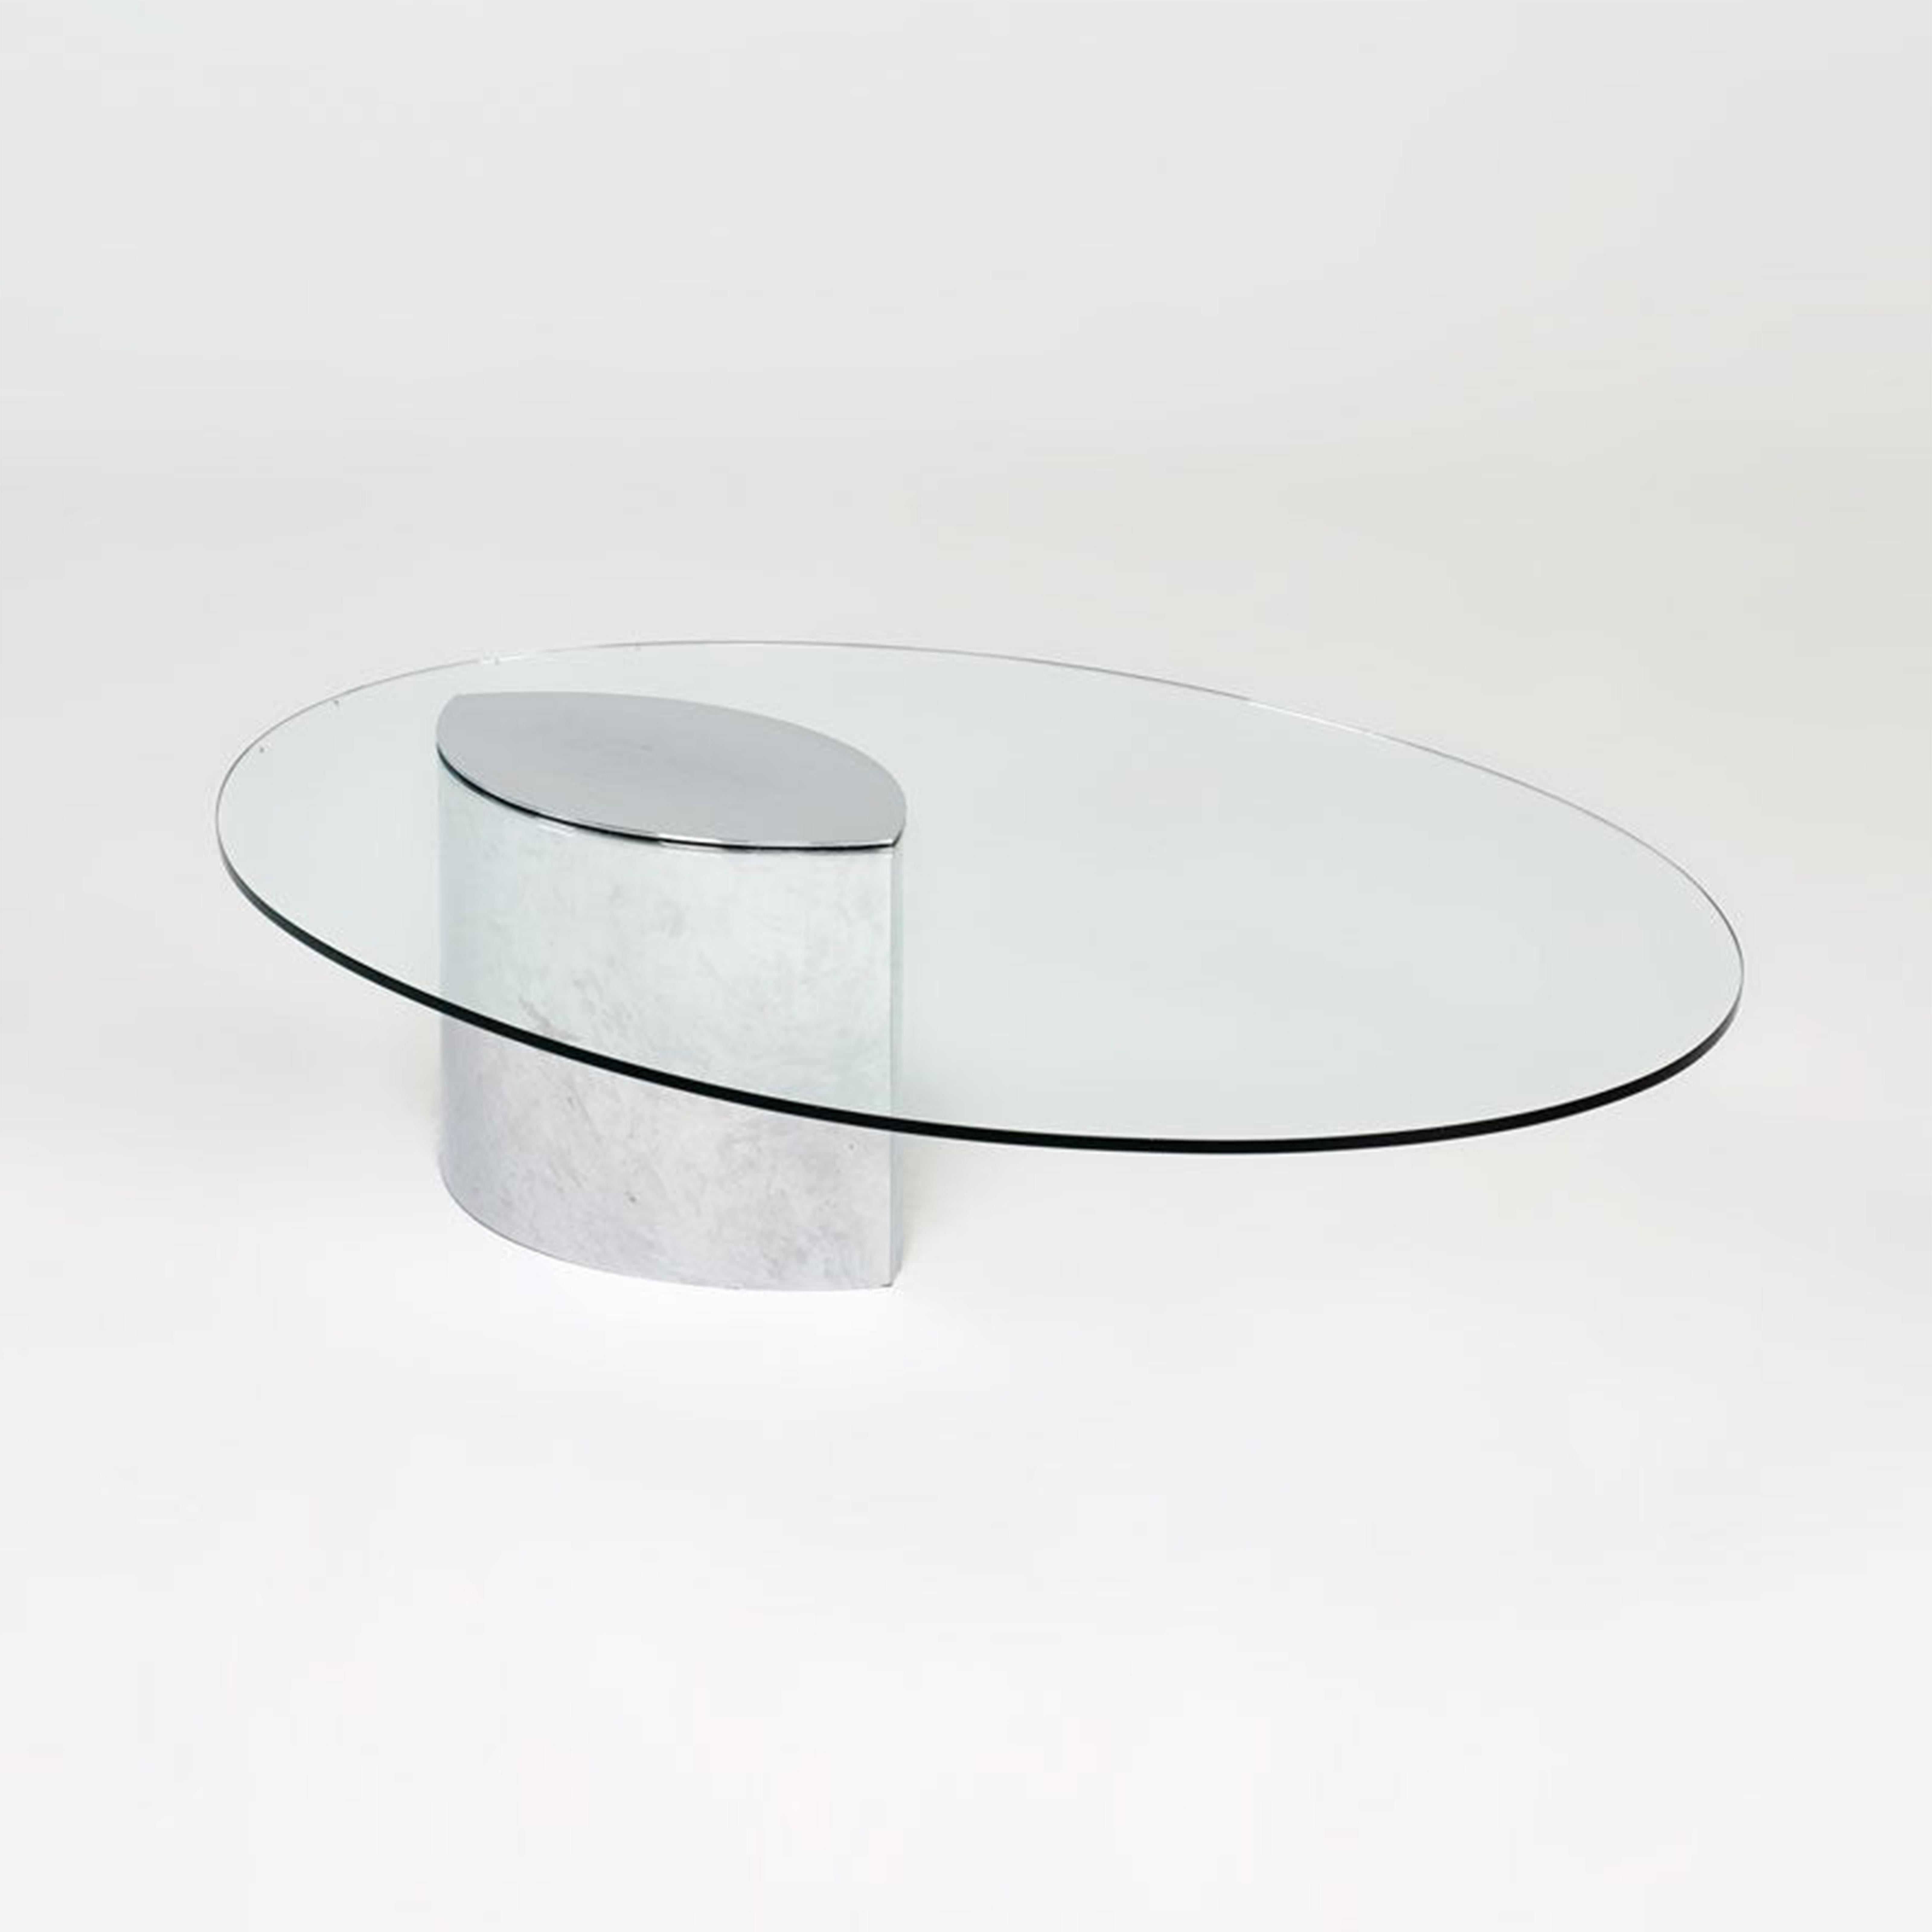 Cini Boeri Lunario cocktail coffee table produced in the 1970s and imported from Italy to UK in the 1980s. 
Chromed steel cantilever design, extremely heavy piece.
The glass has V.A.C. etched on it, couple of chips and some manufacturer marks,